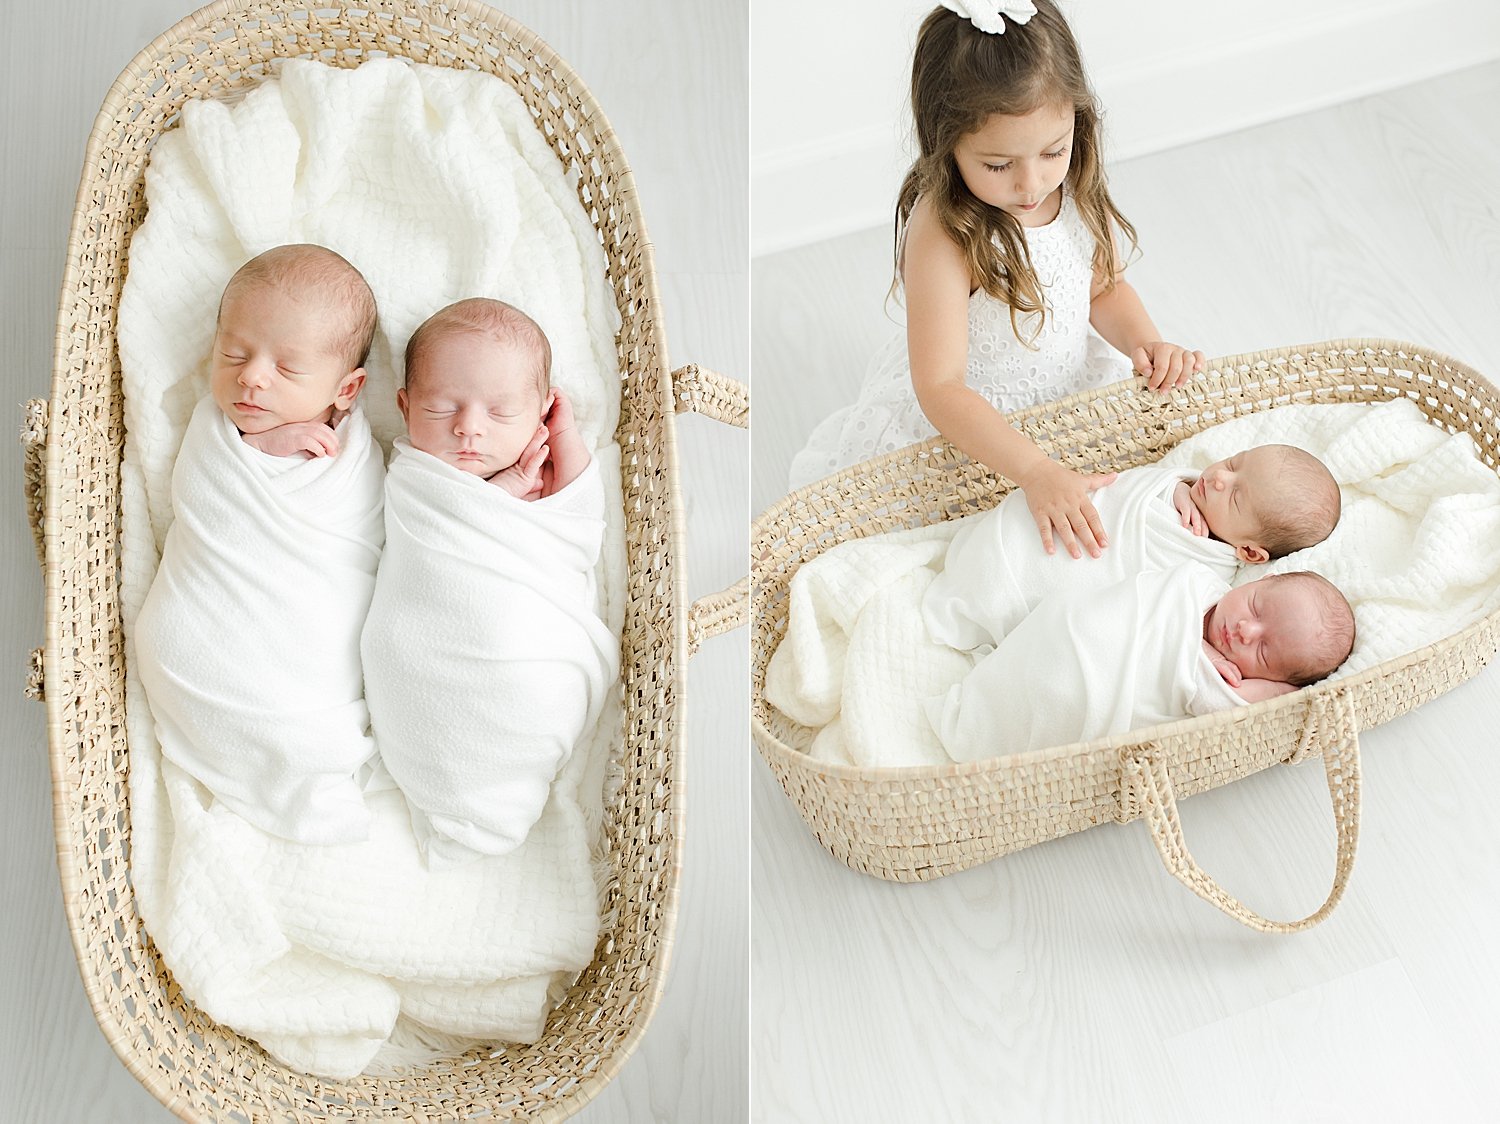 Big sister looking over her baby brothers | Kristin Wood Photography